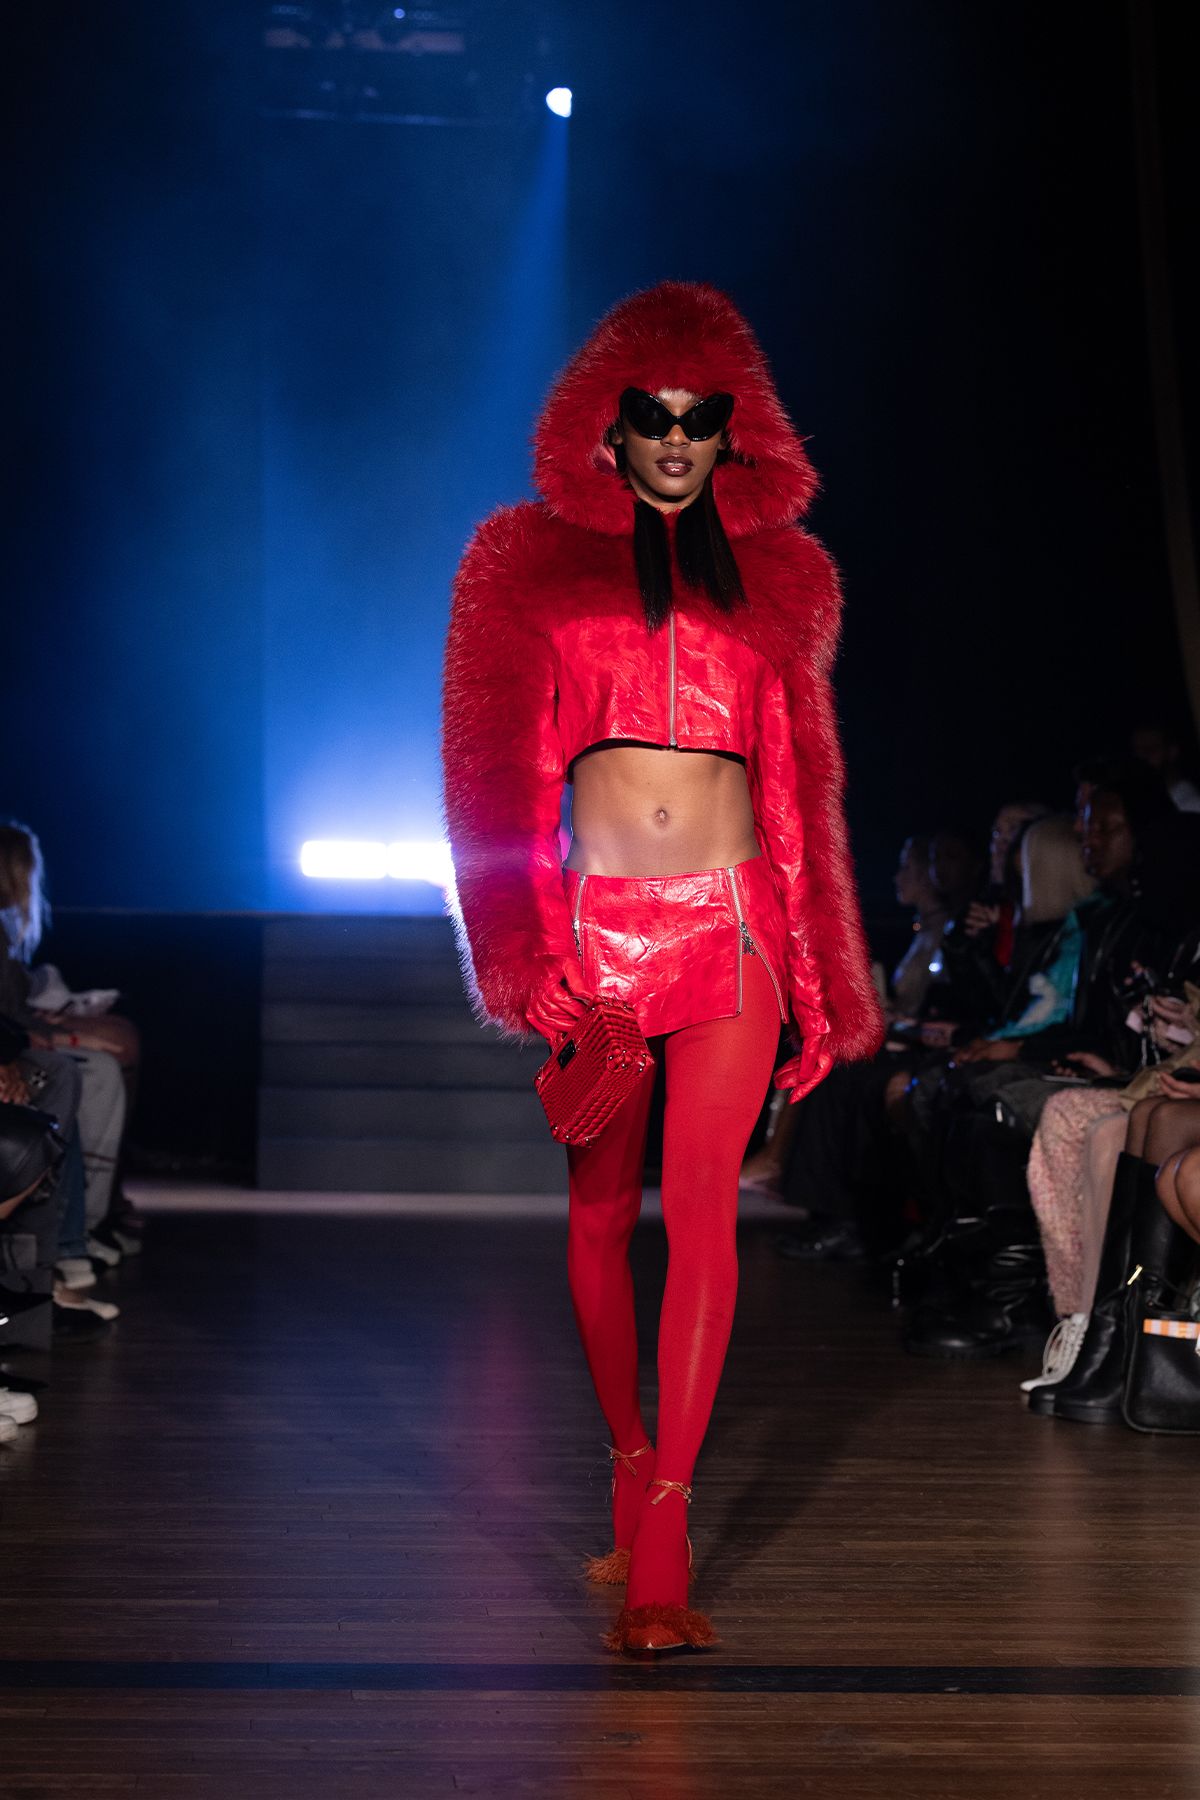 Kim Shui’s show celebrated Lunar New Year on the eve of the holiday with vibrant colors and vegan materials.